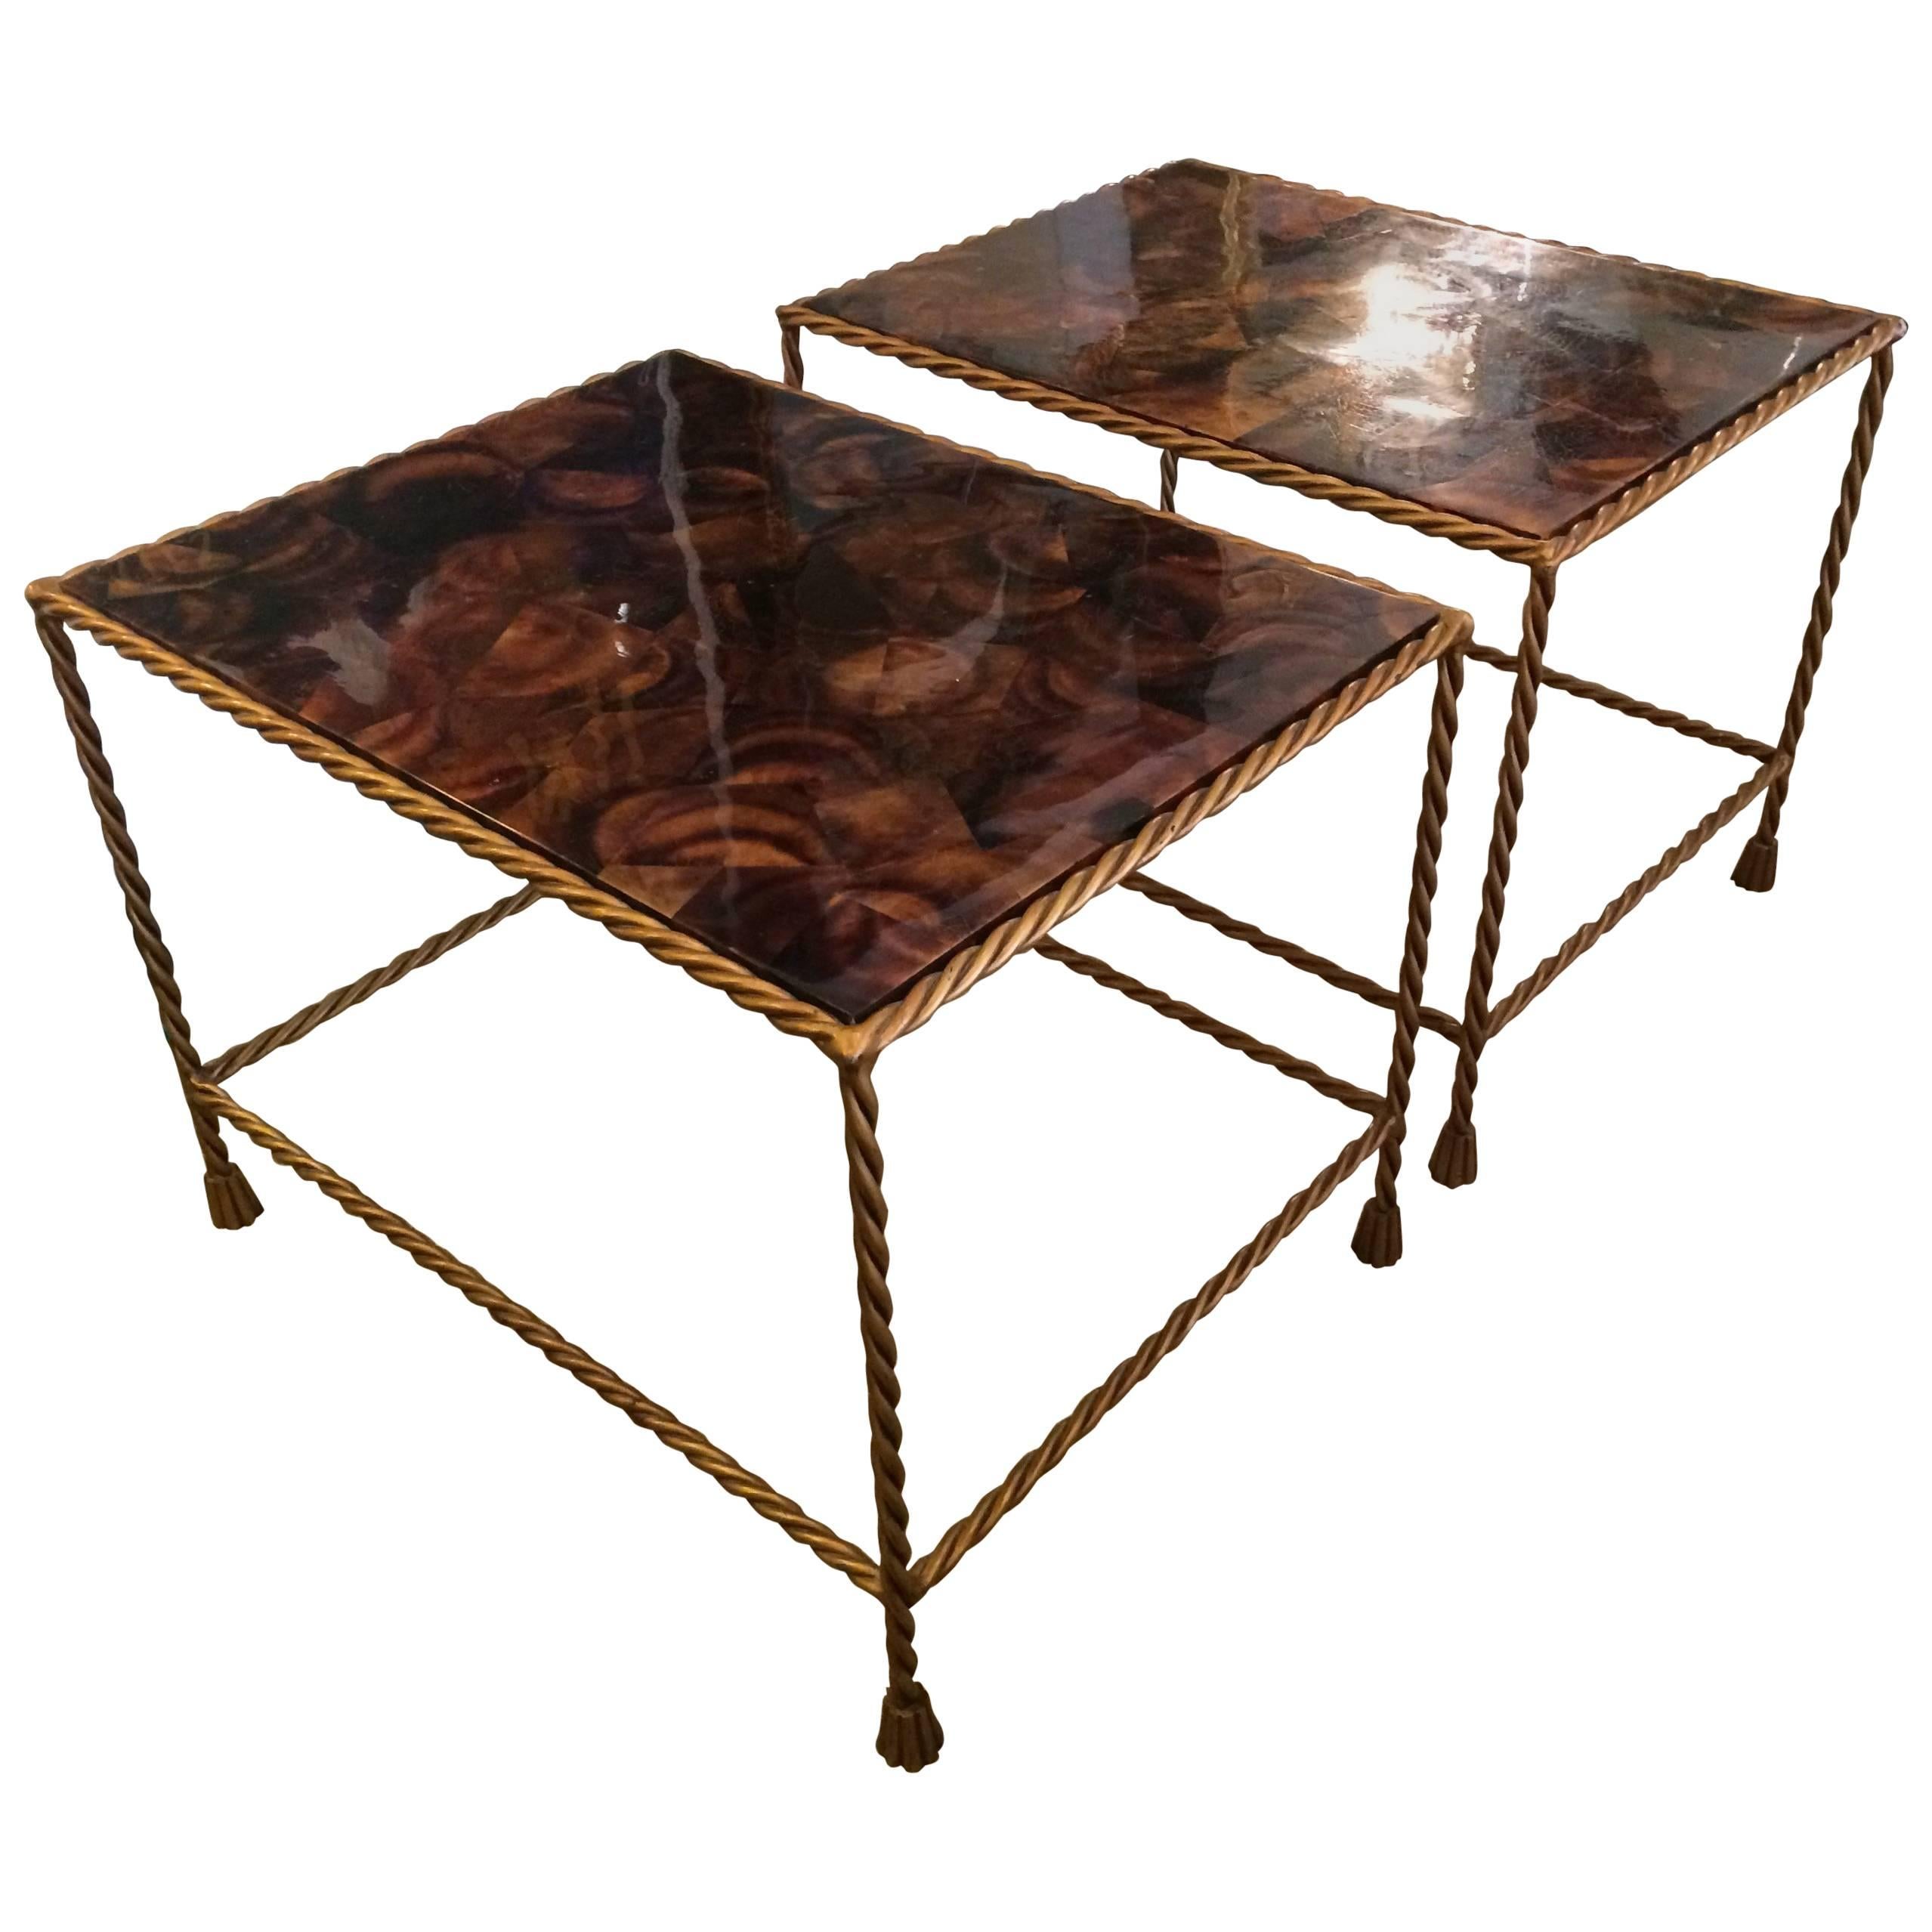 Very Glamorous Pair of Brass Tassel Motife and Faux Tortoise Side Tables